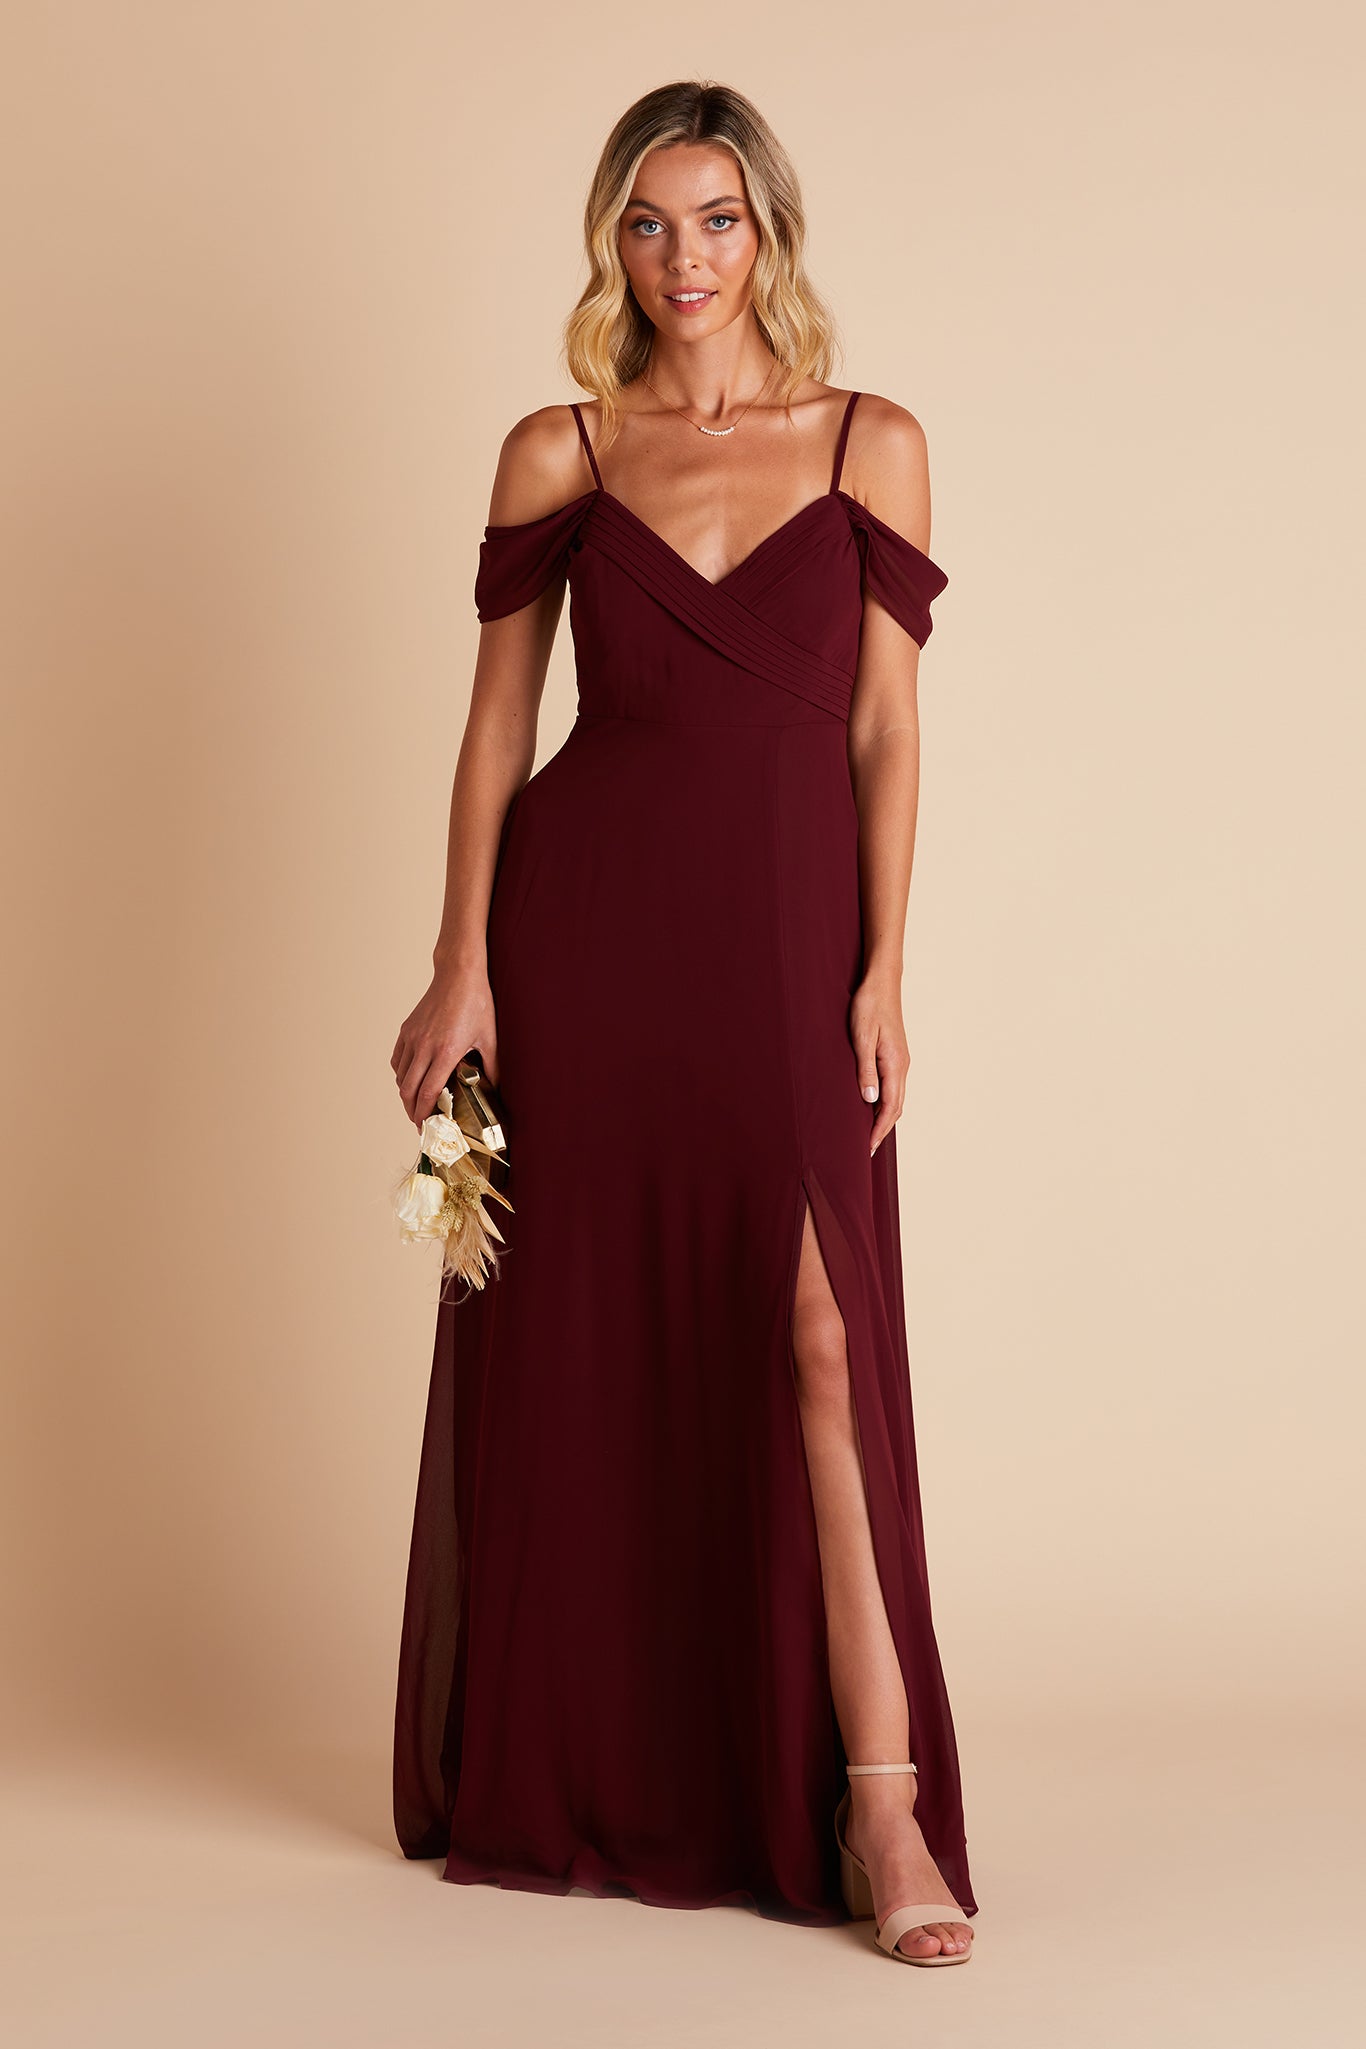 Spence convertible bridesmaid dress in cabernet burgundy chiffon with slit by Birdy Grey, front view